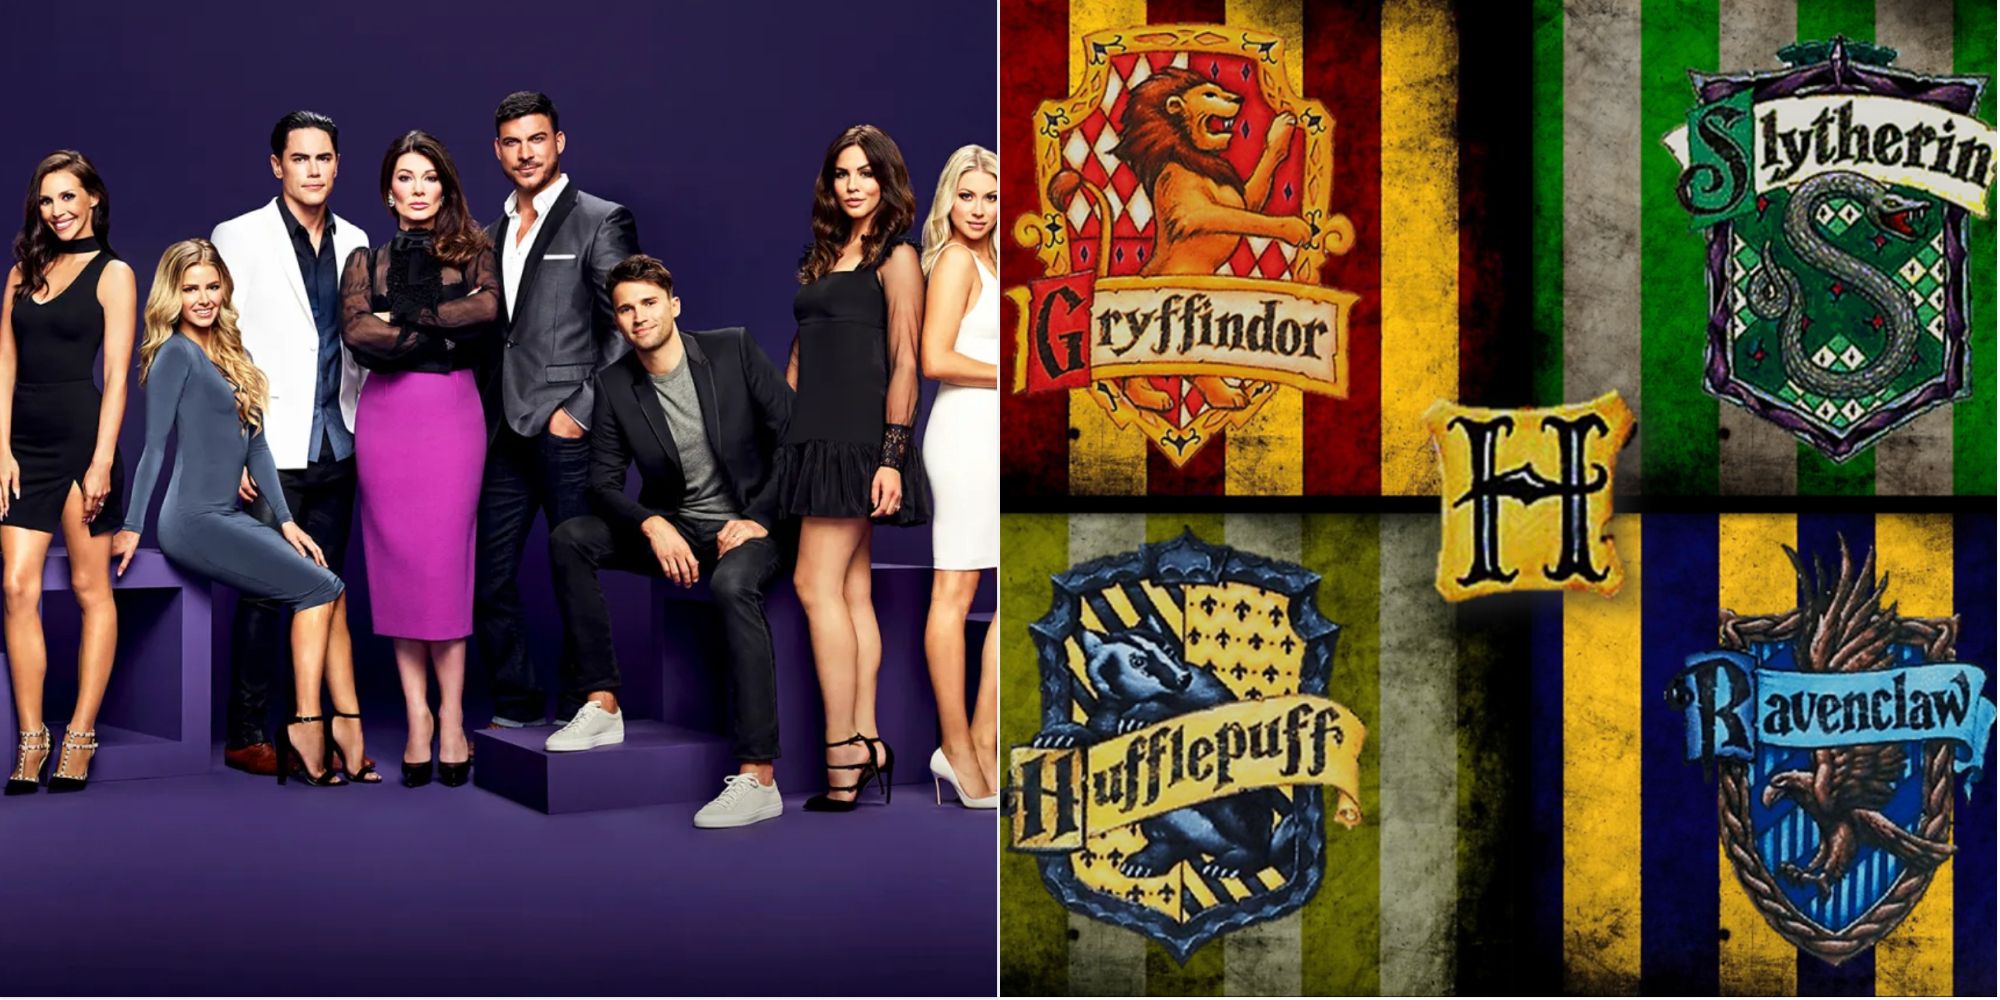 The cast of Vanderpump Rules. The Hogwarts Houses pictured as coats of arms